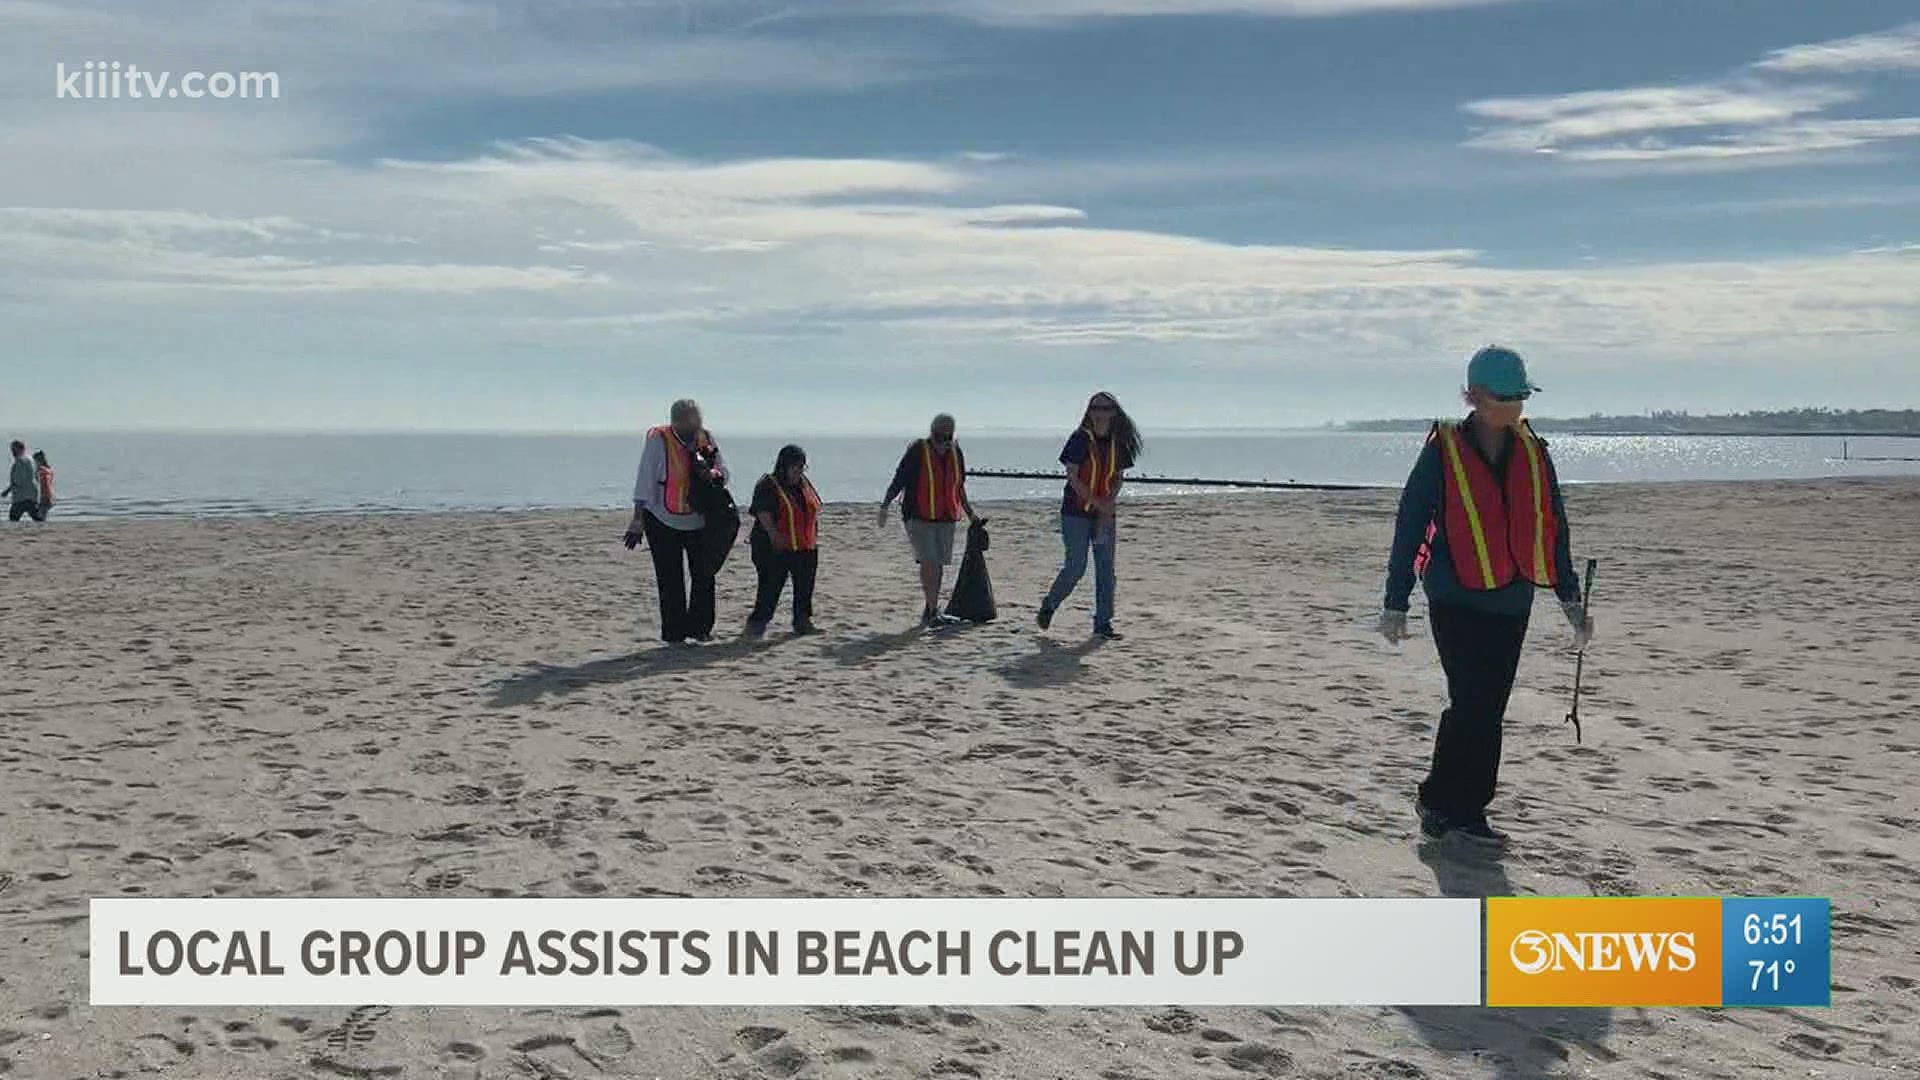 Members of the nonprofit organization were out picking up trash on McGee beach while learning vocational skills.